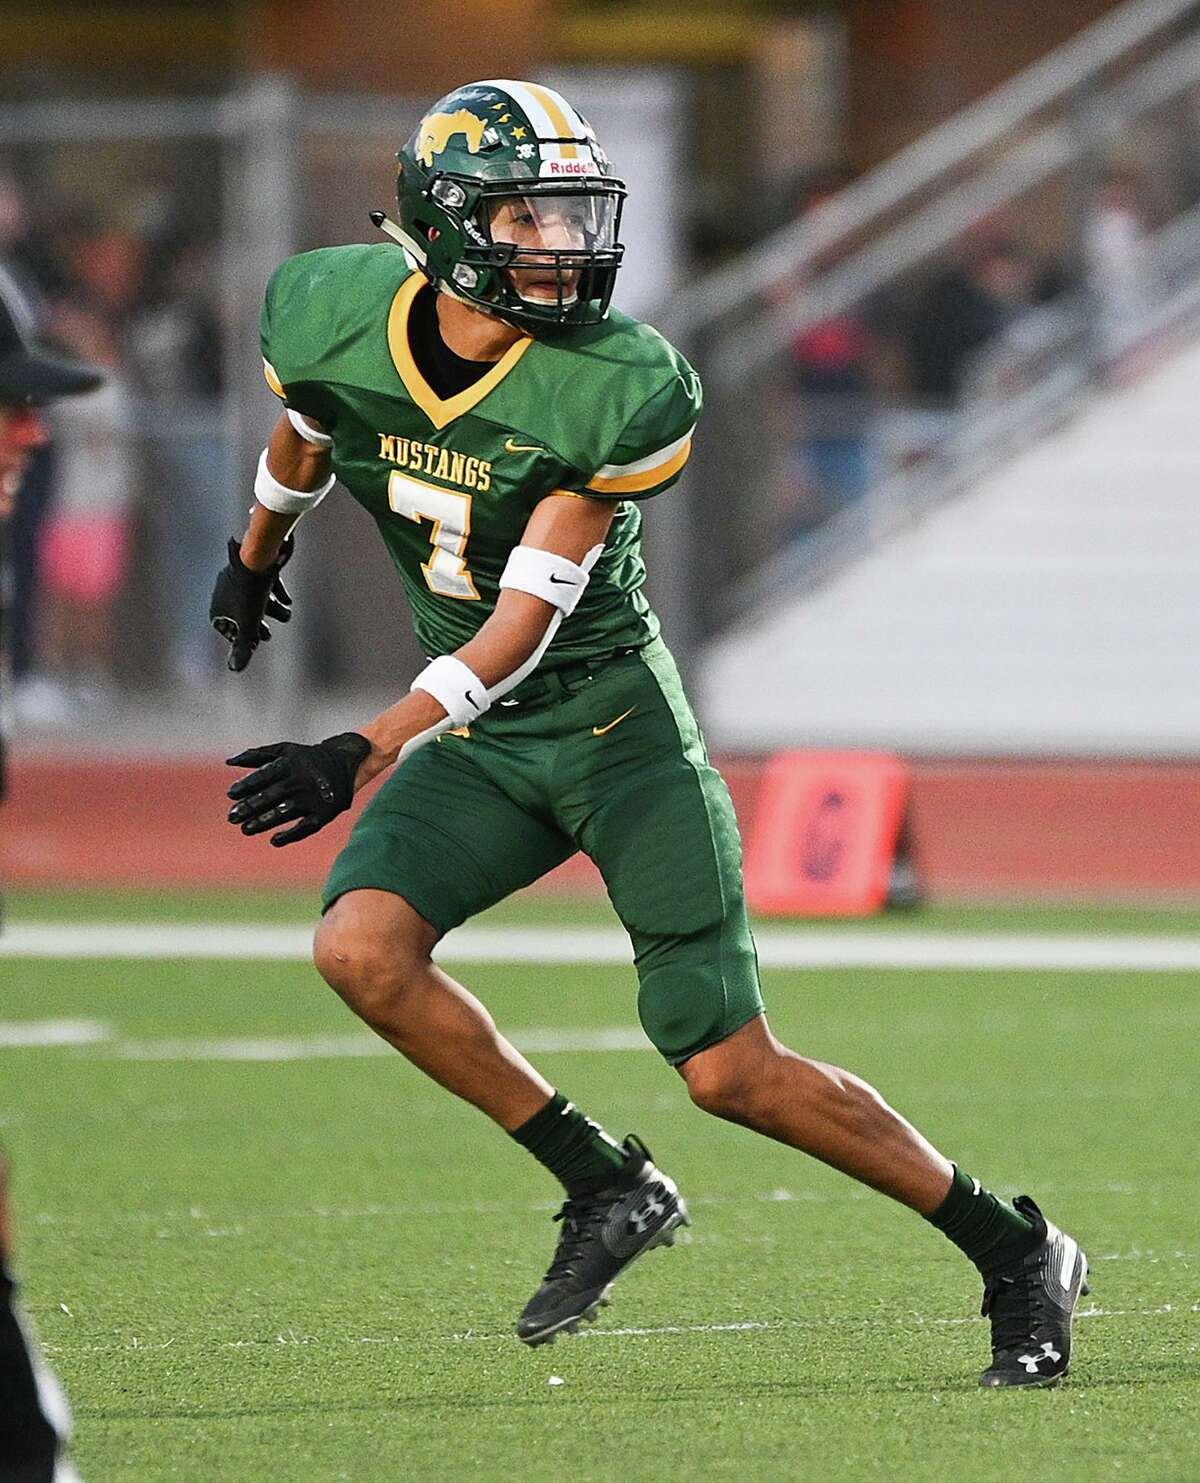 Free safety Alexis Aldana is dependable defensive back for the Mustangs.